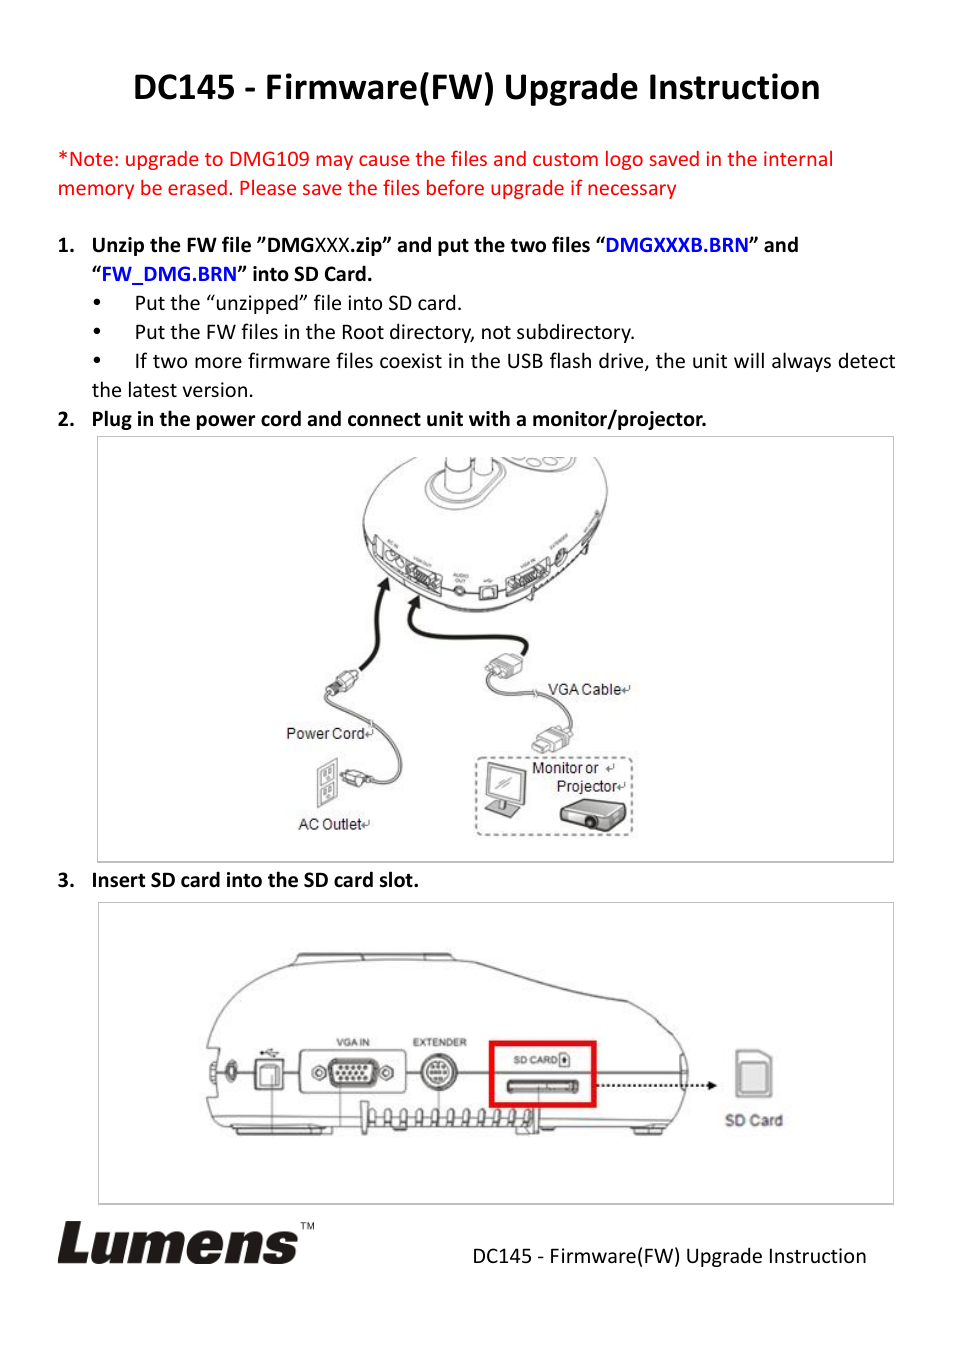 DC145 Firmware Upgrade Instruction